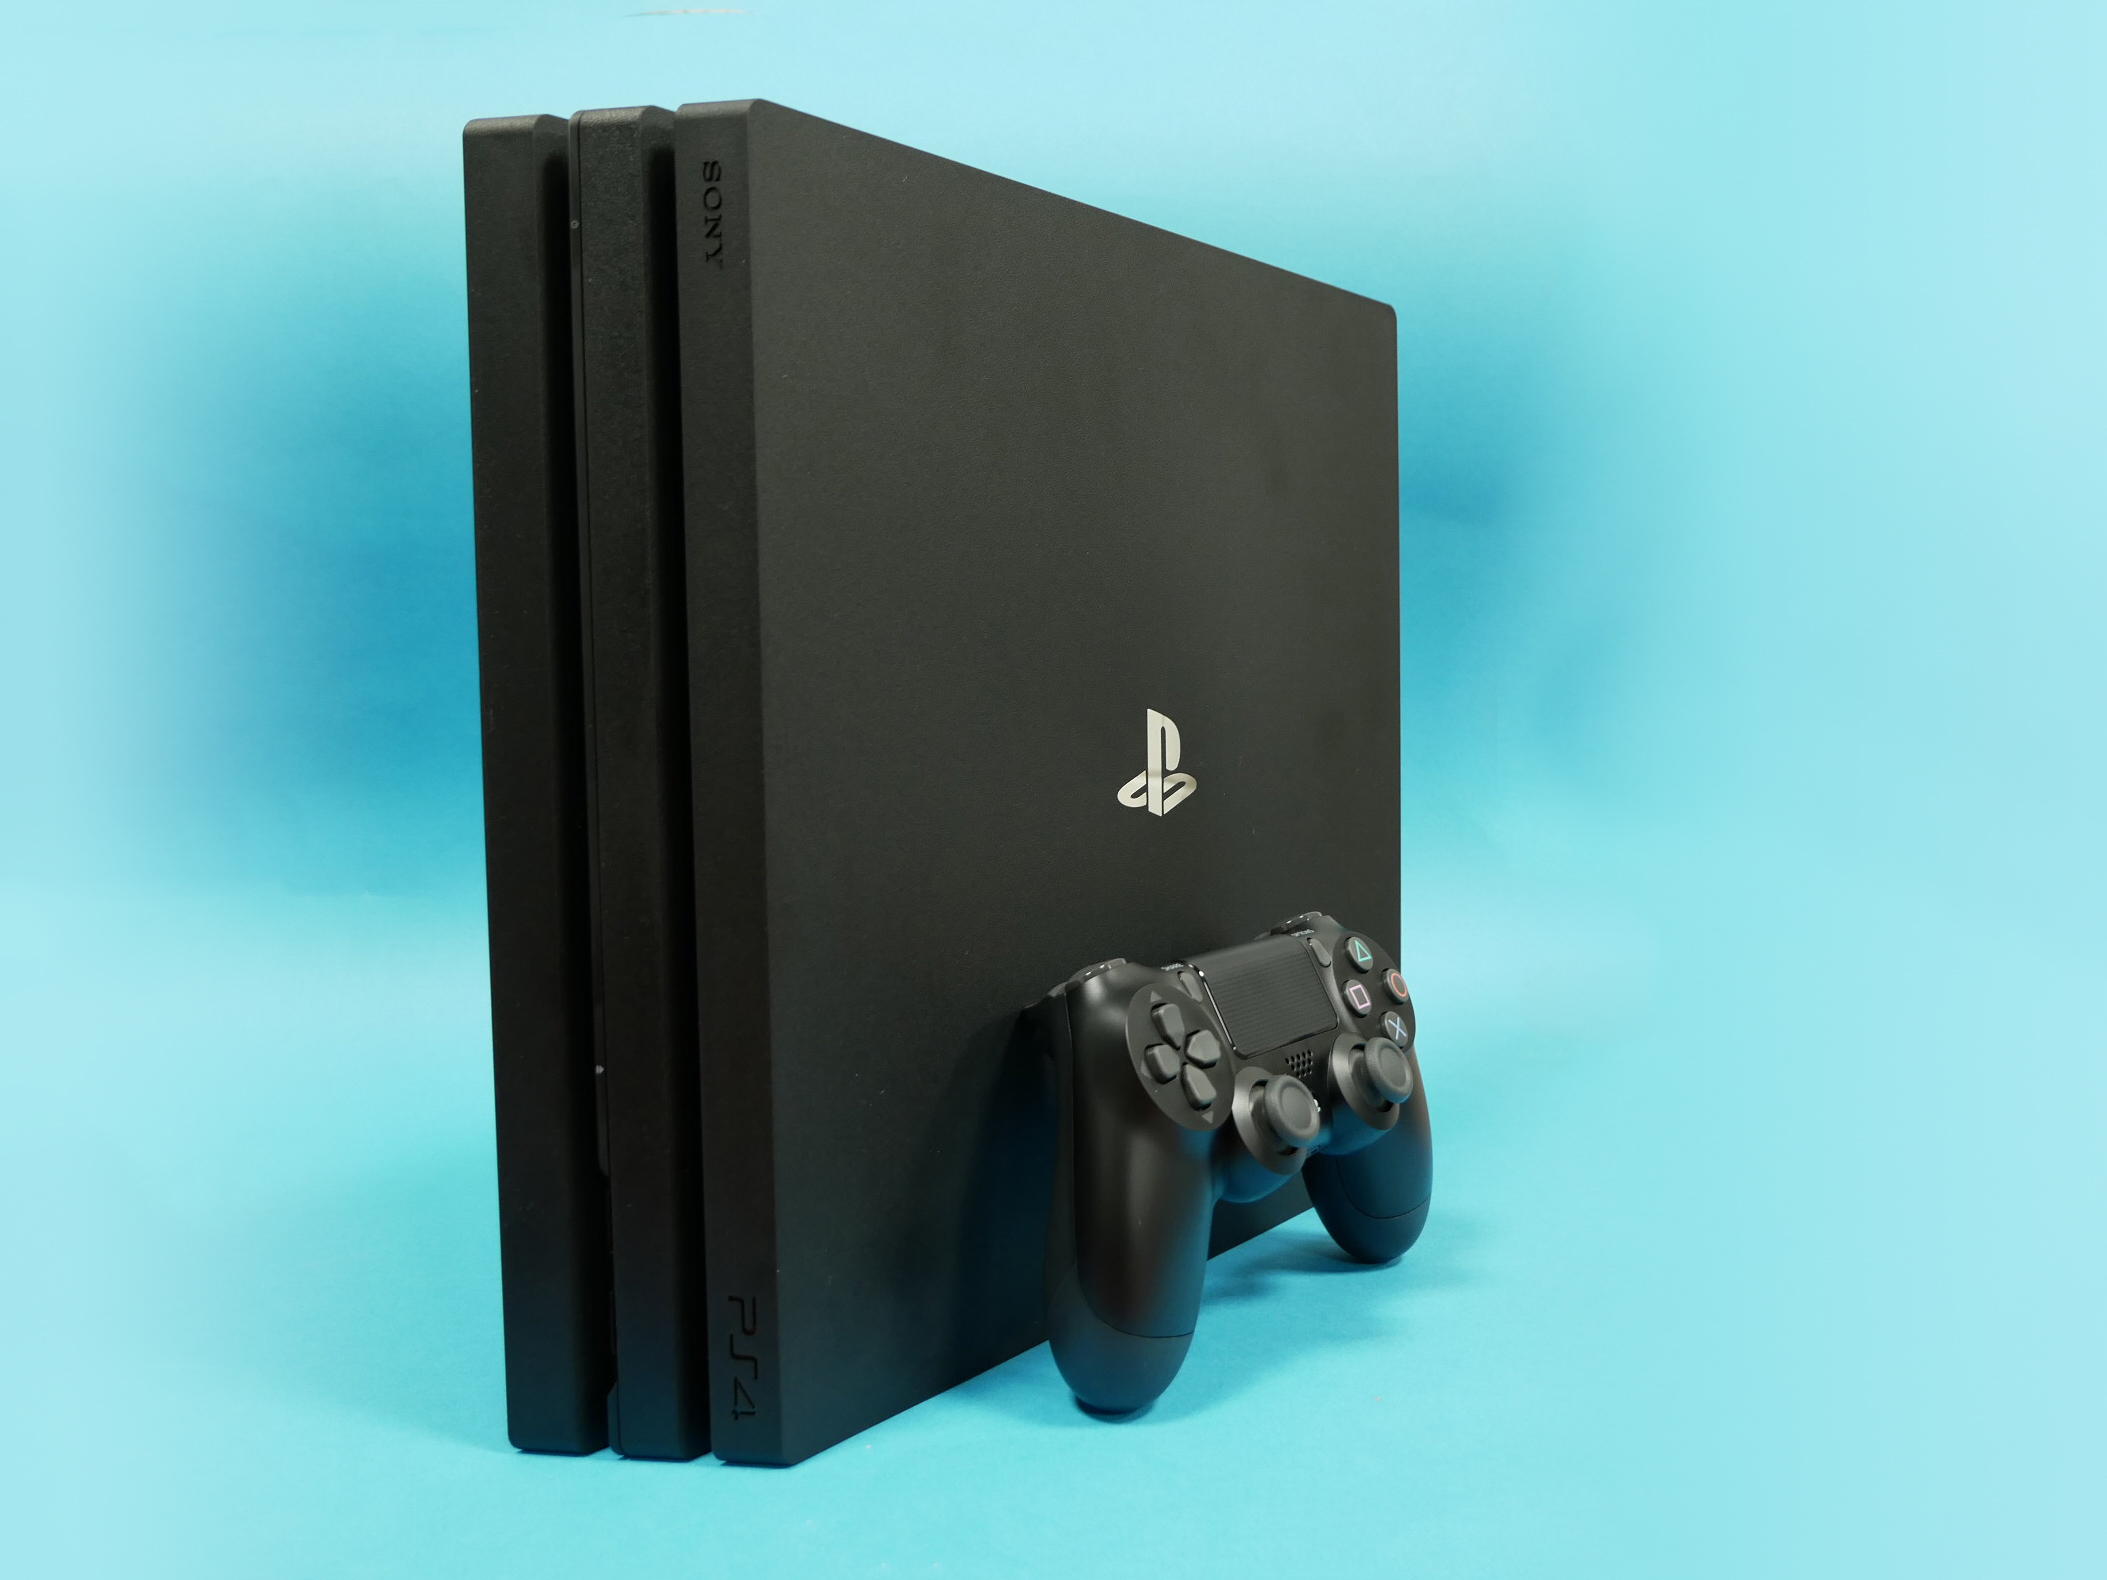 Sony PS4 Pro review (PlayStation 4 Pro)